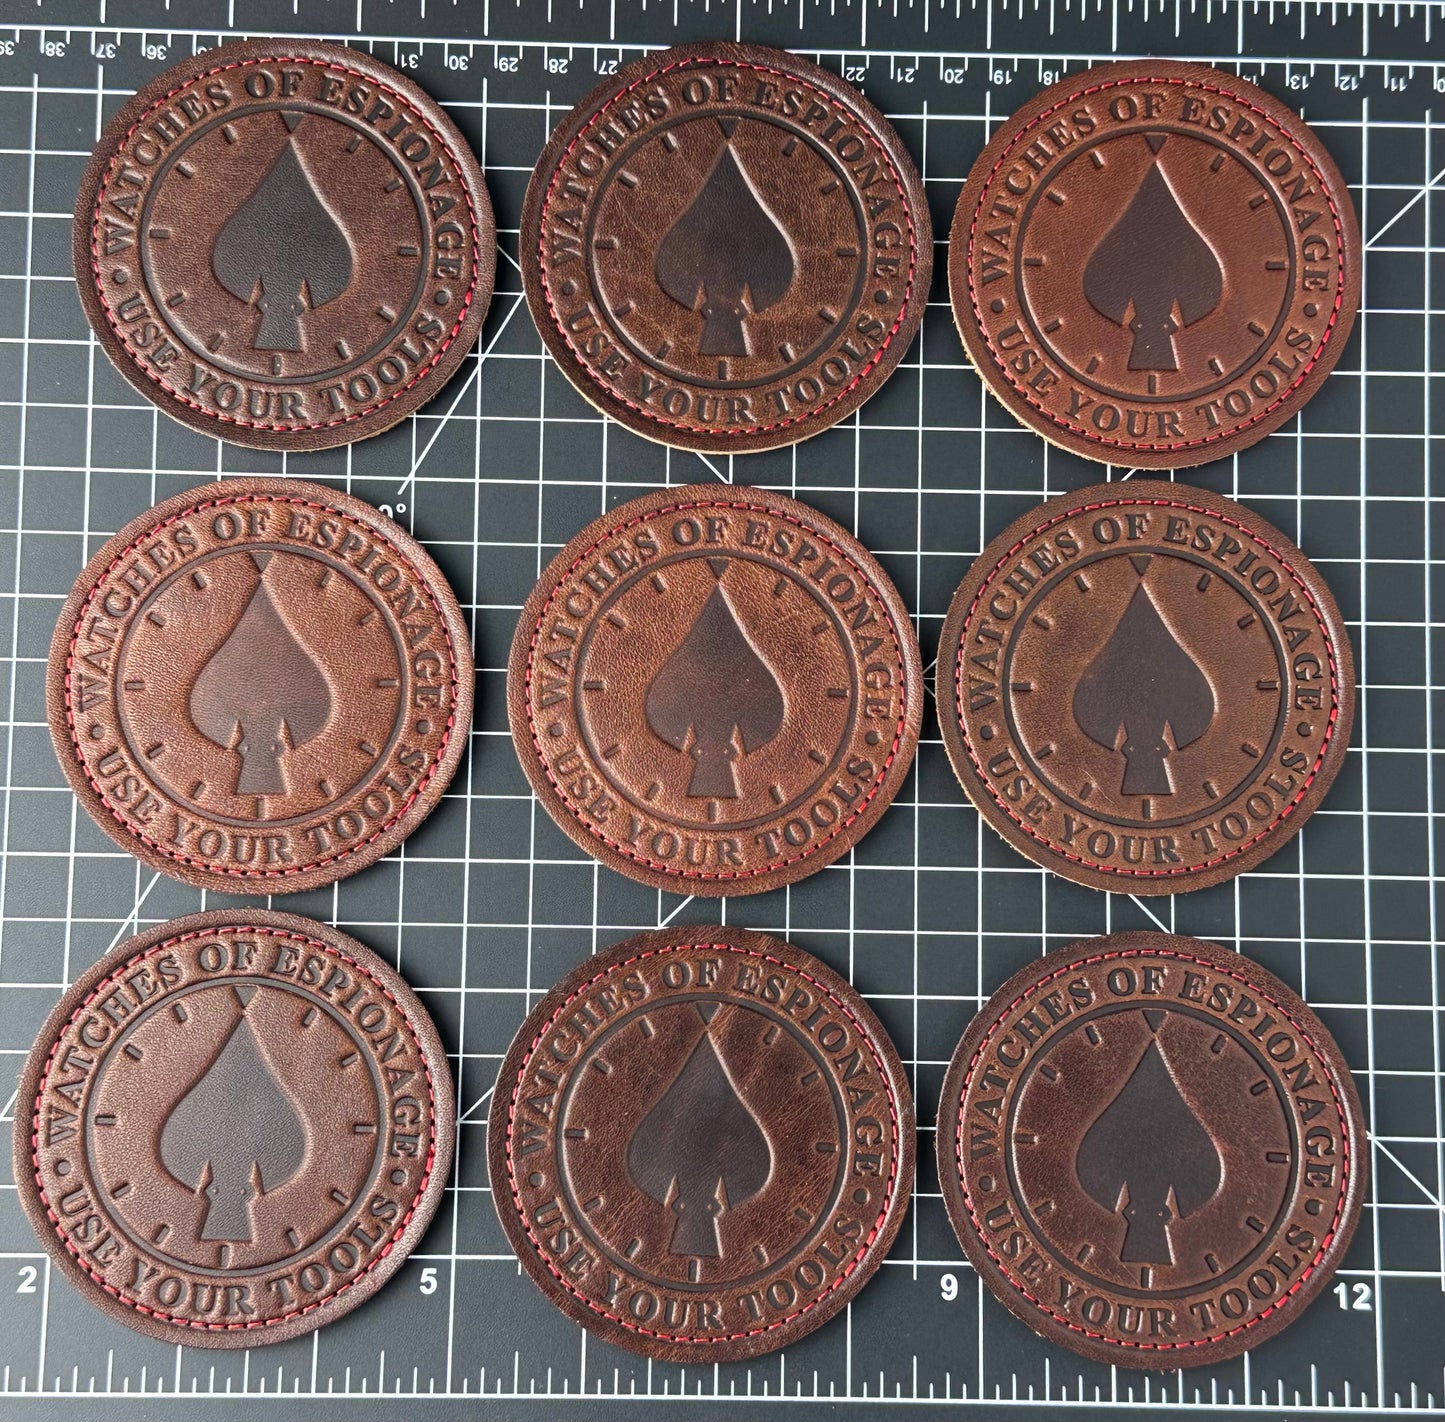 W.O.E. Made in USA Leather Patches